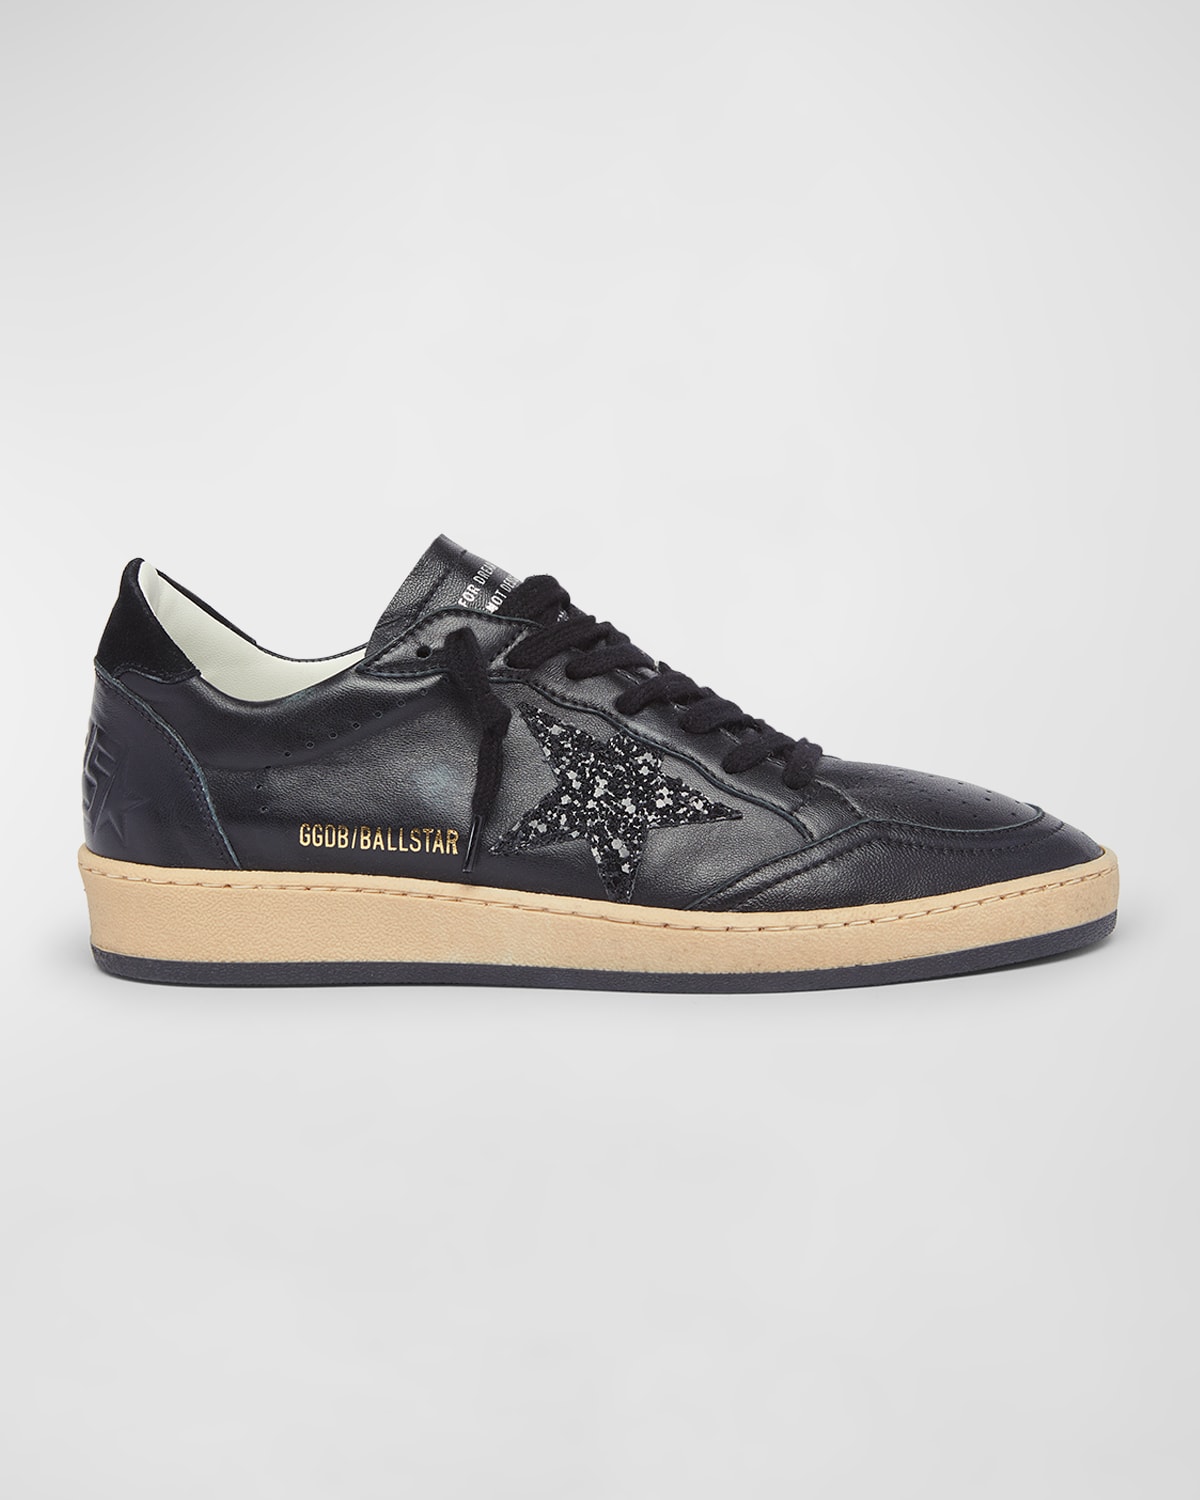 Golden Goose Ball Star Glitter Napa Leather Sneakers In Black